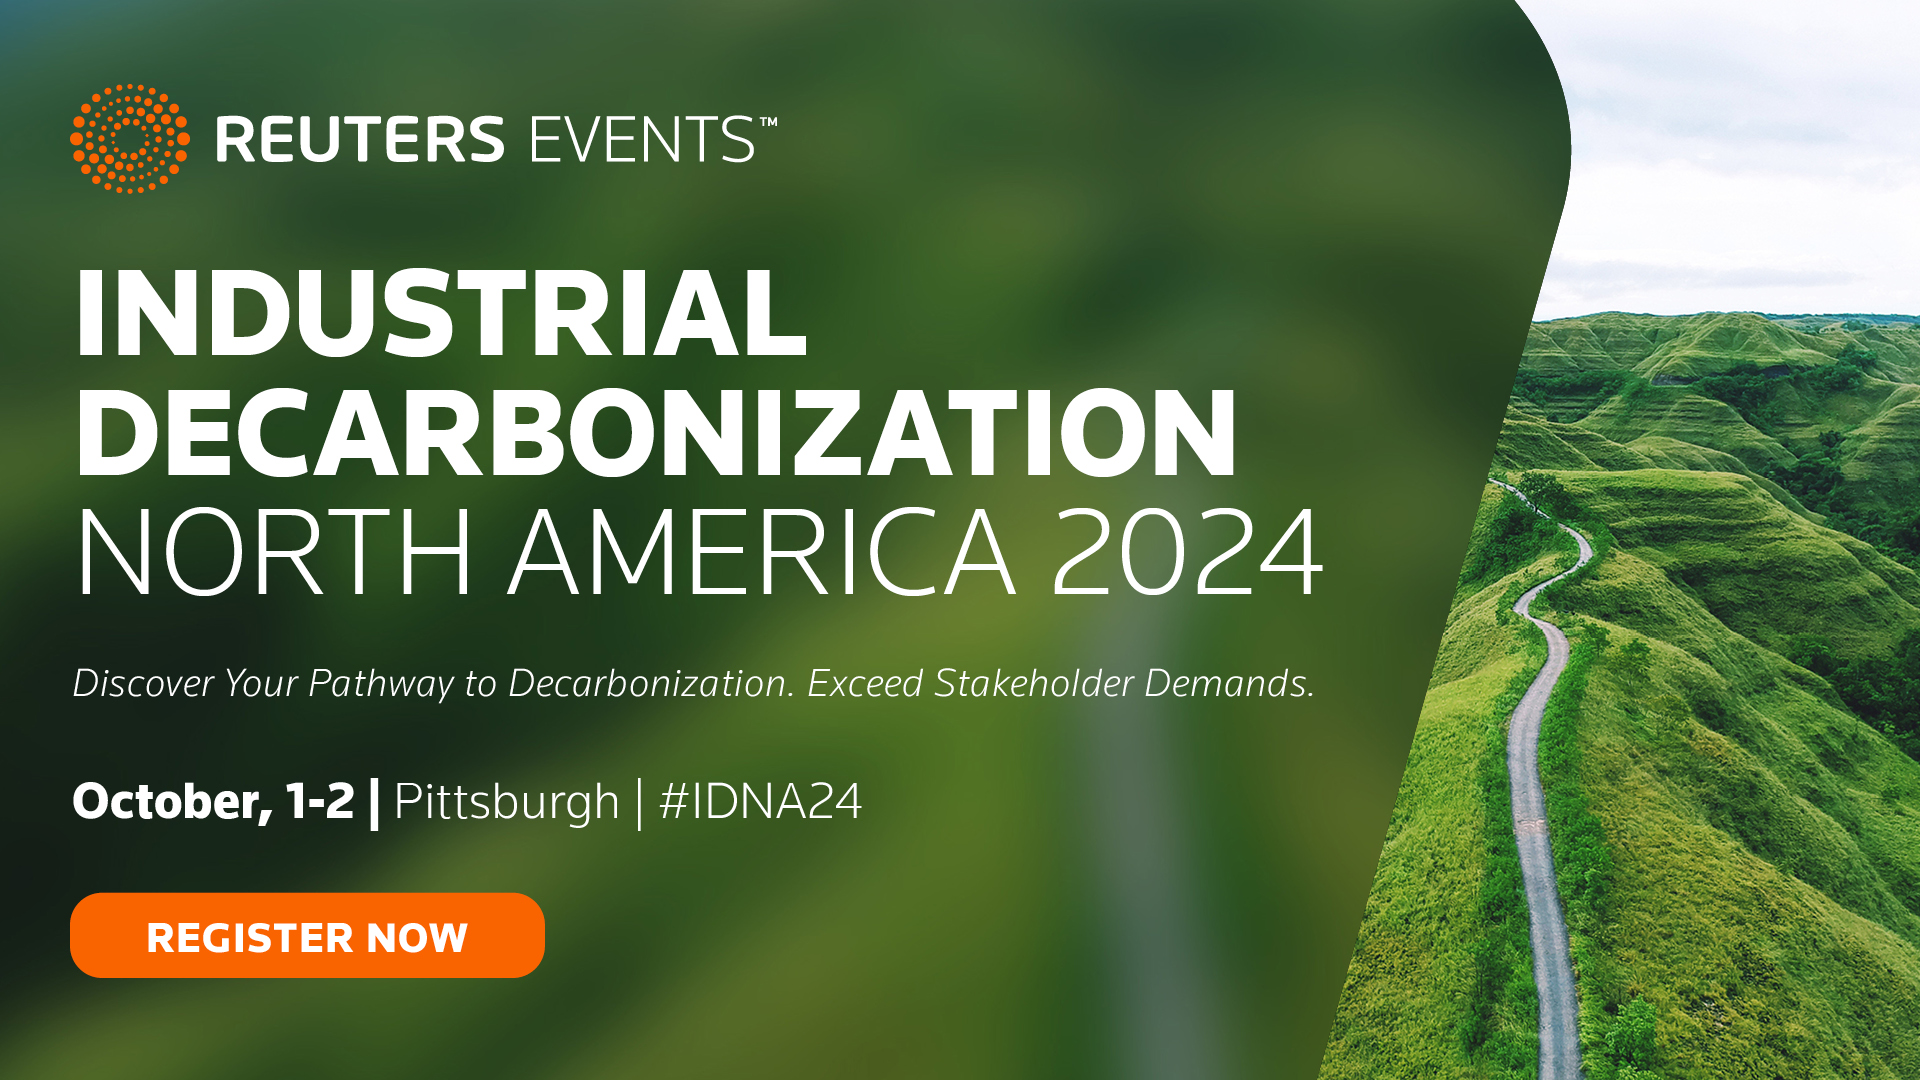 Industrial Leaders to Converge at Reuters Events: Industrial Decarbonization North America 2024